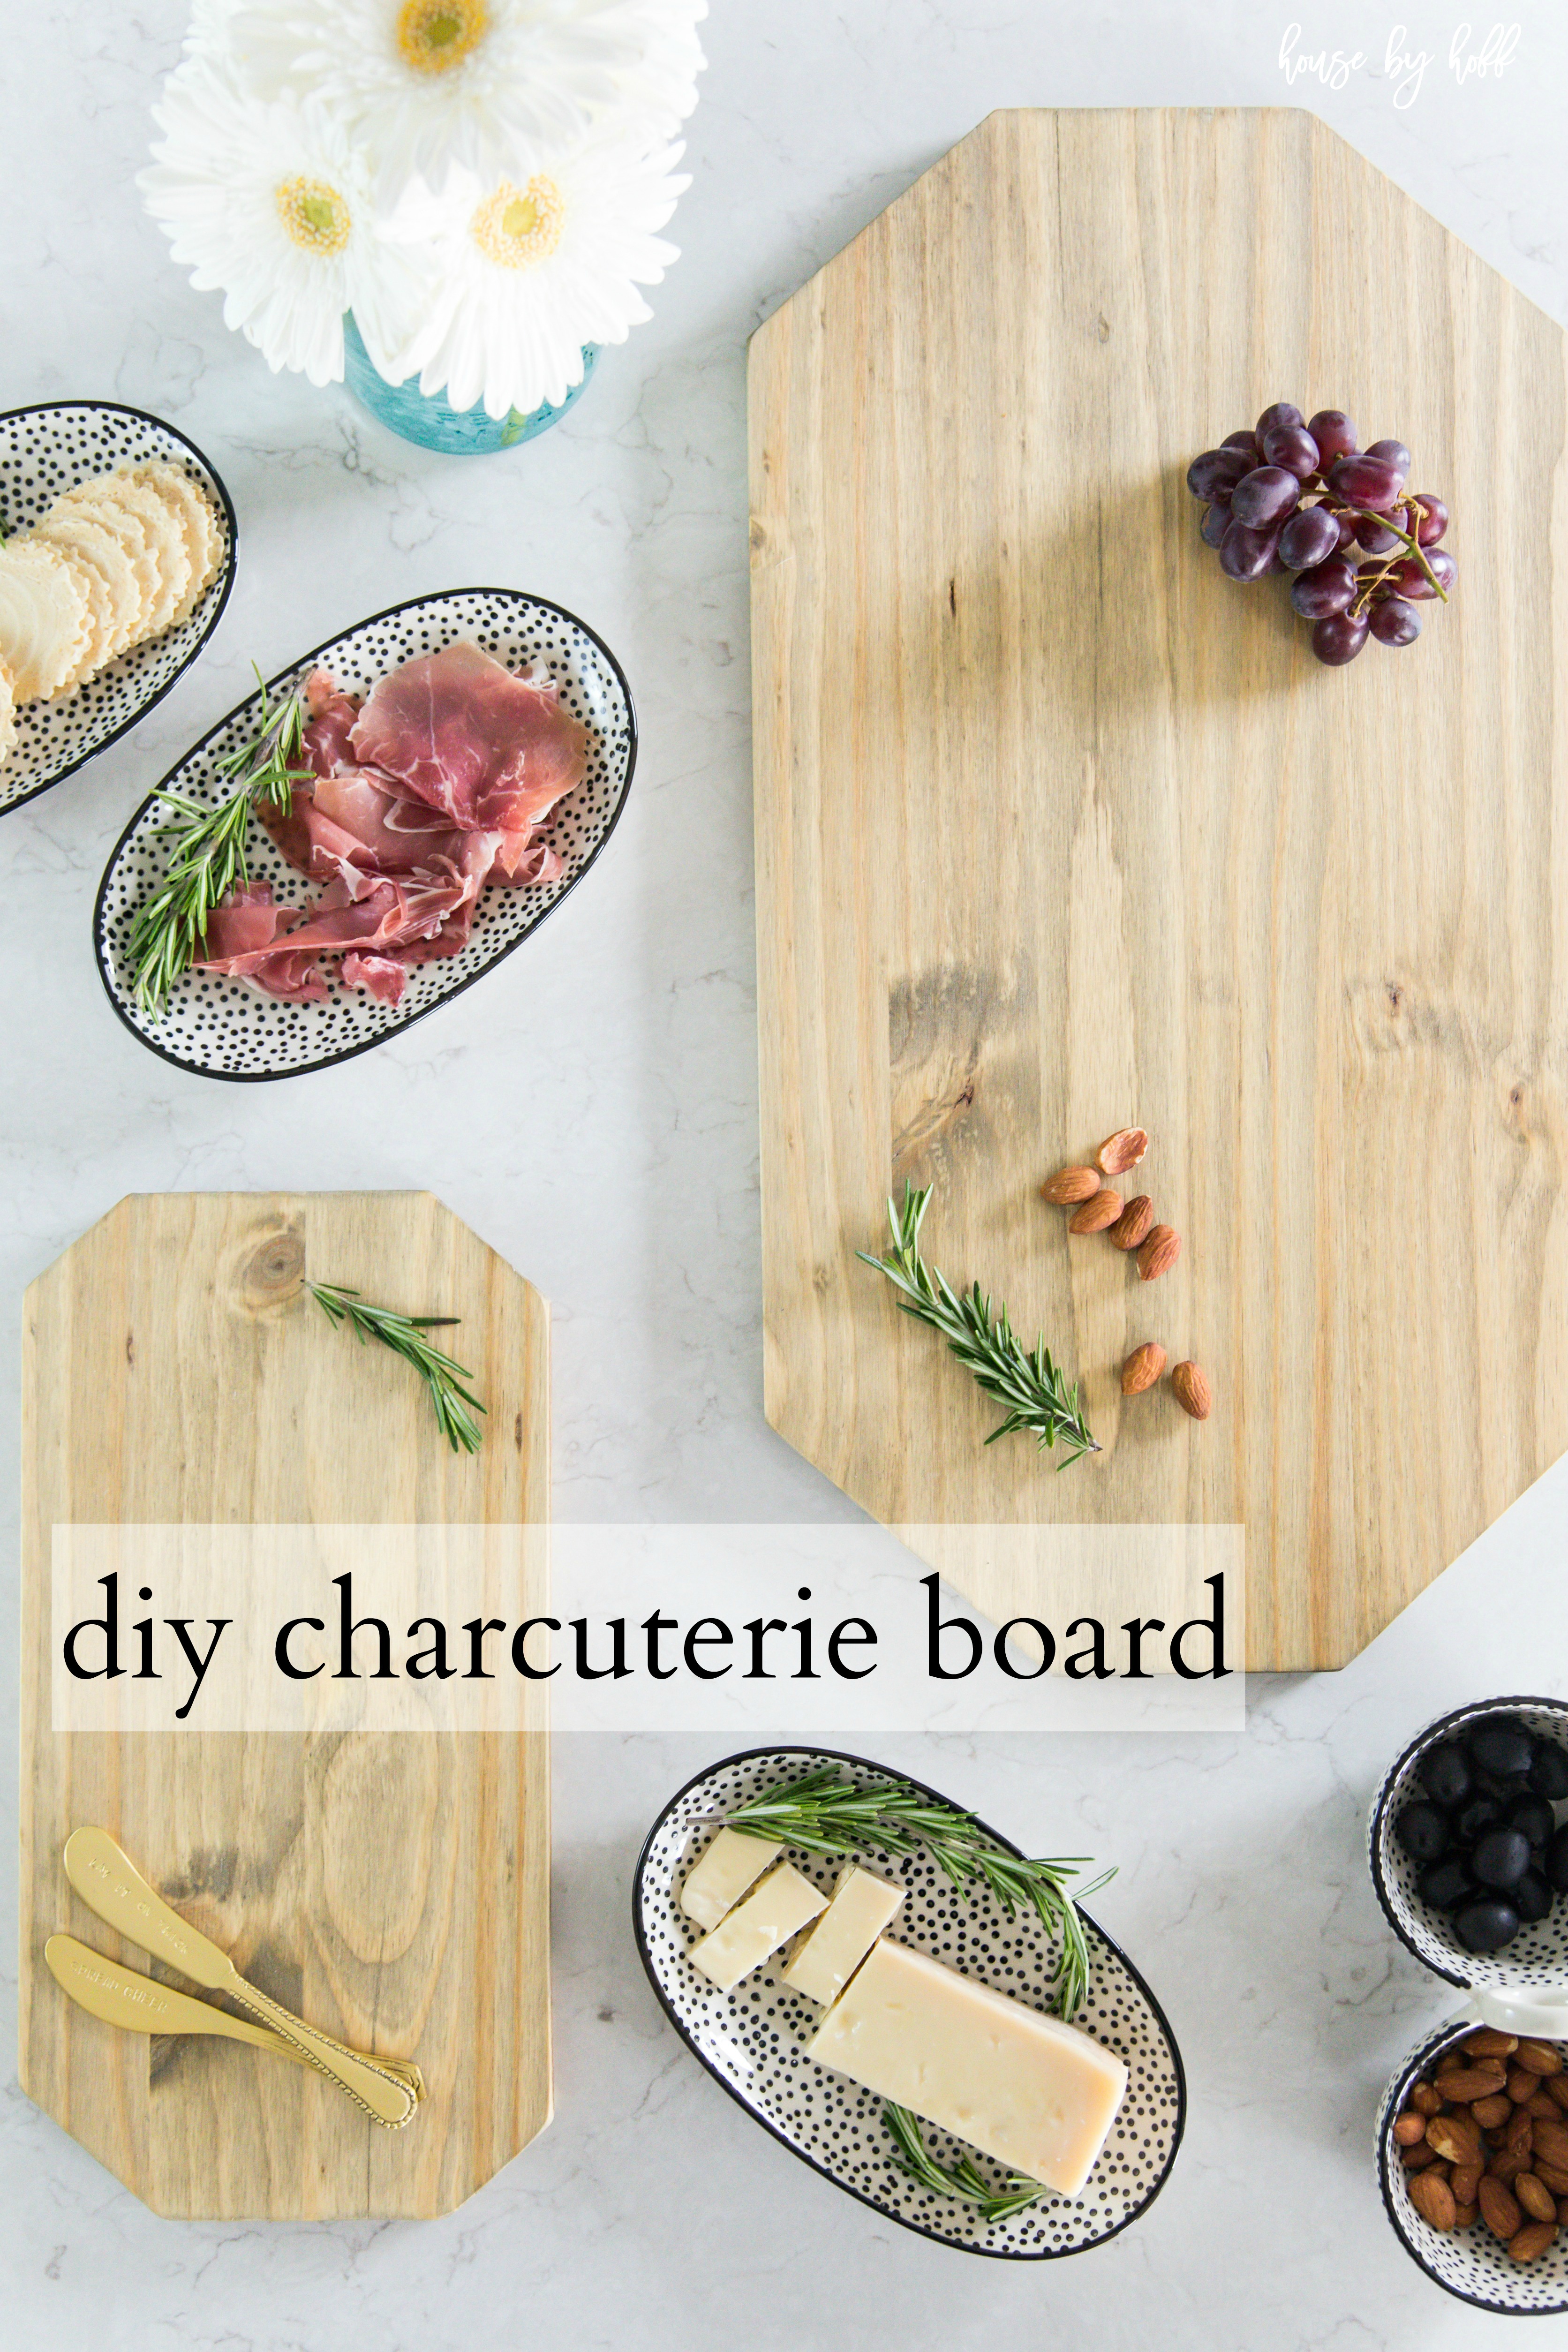 DIY Charcuterie or Cutting Board - Saved from Salvage